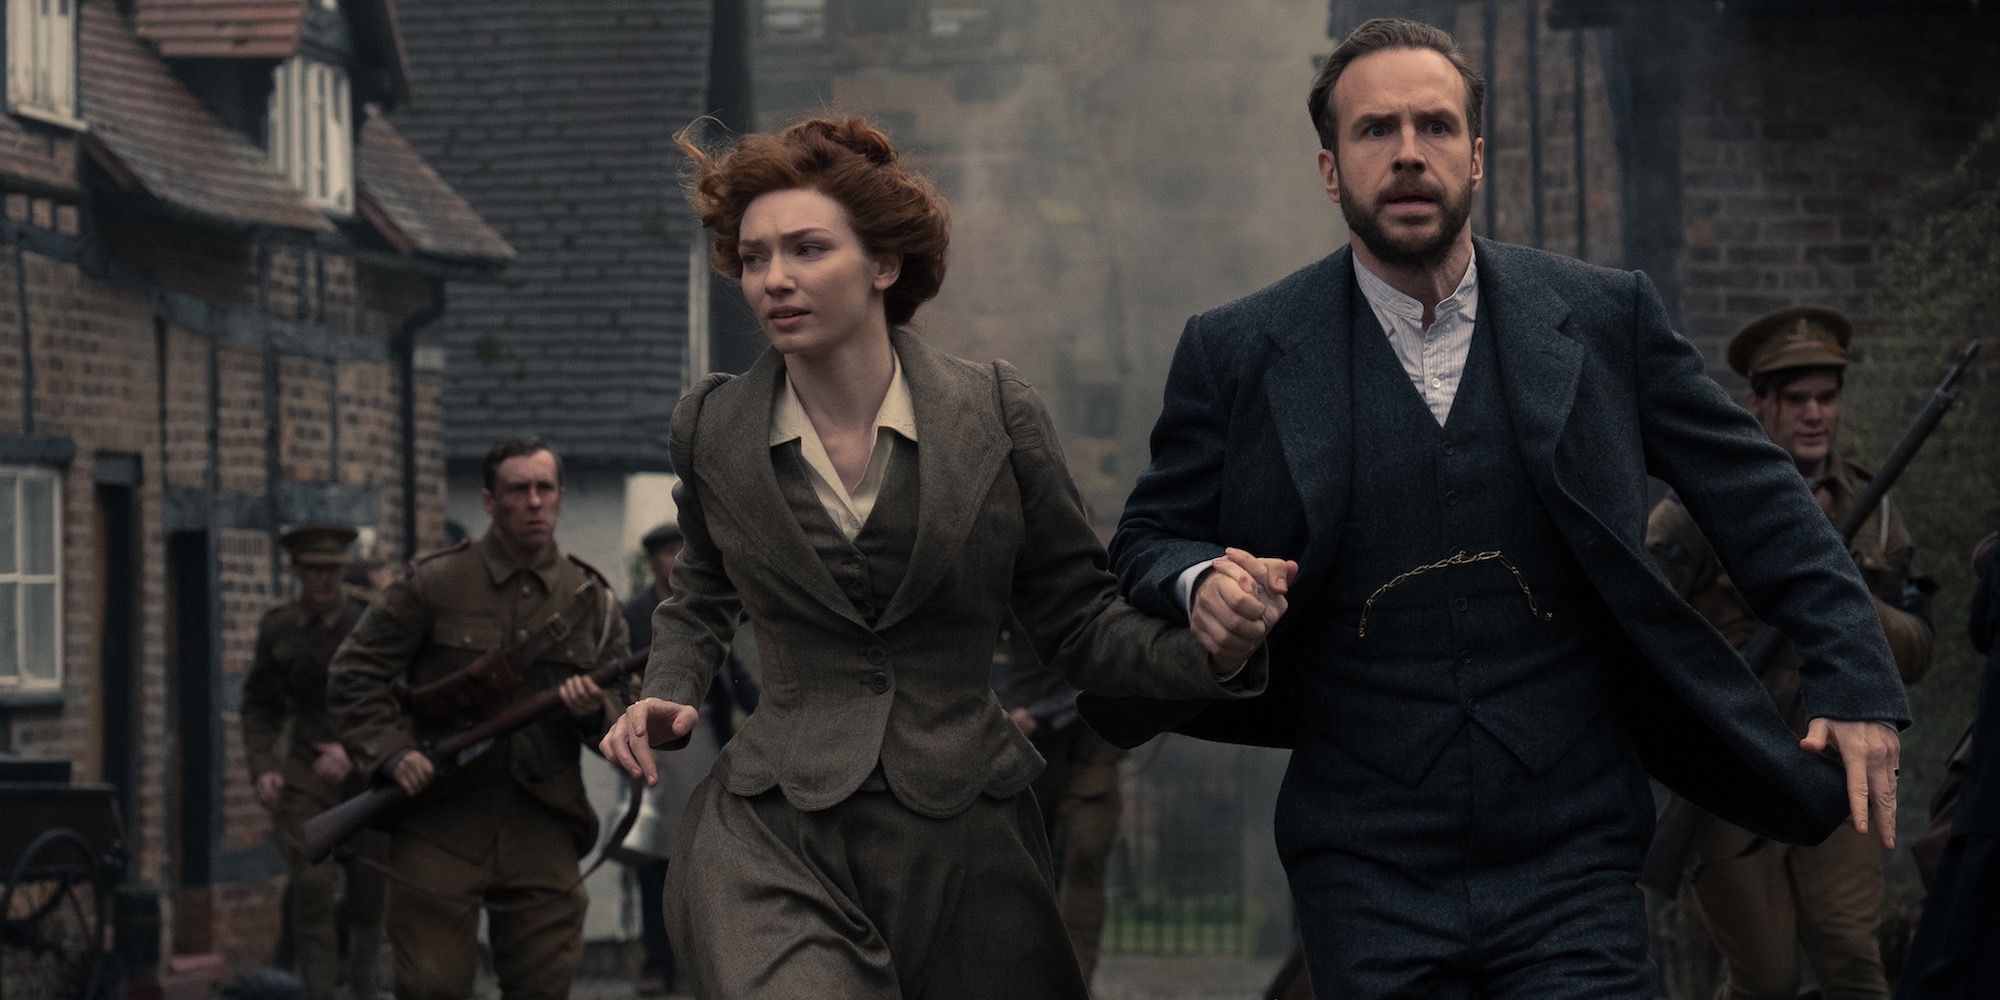 George and Amy run through the streets of Edwardian London.